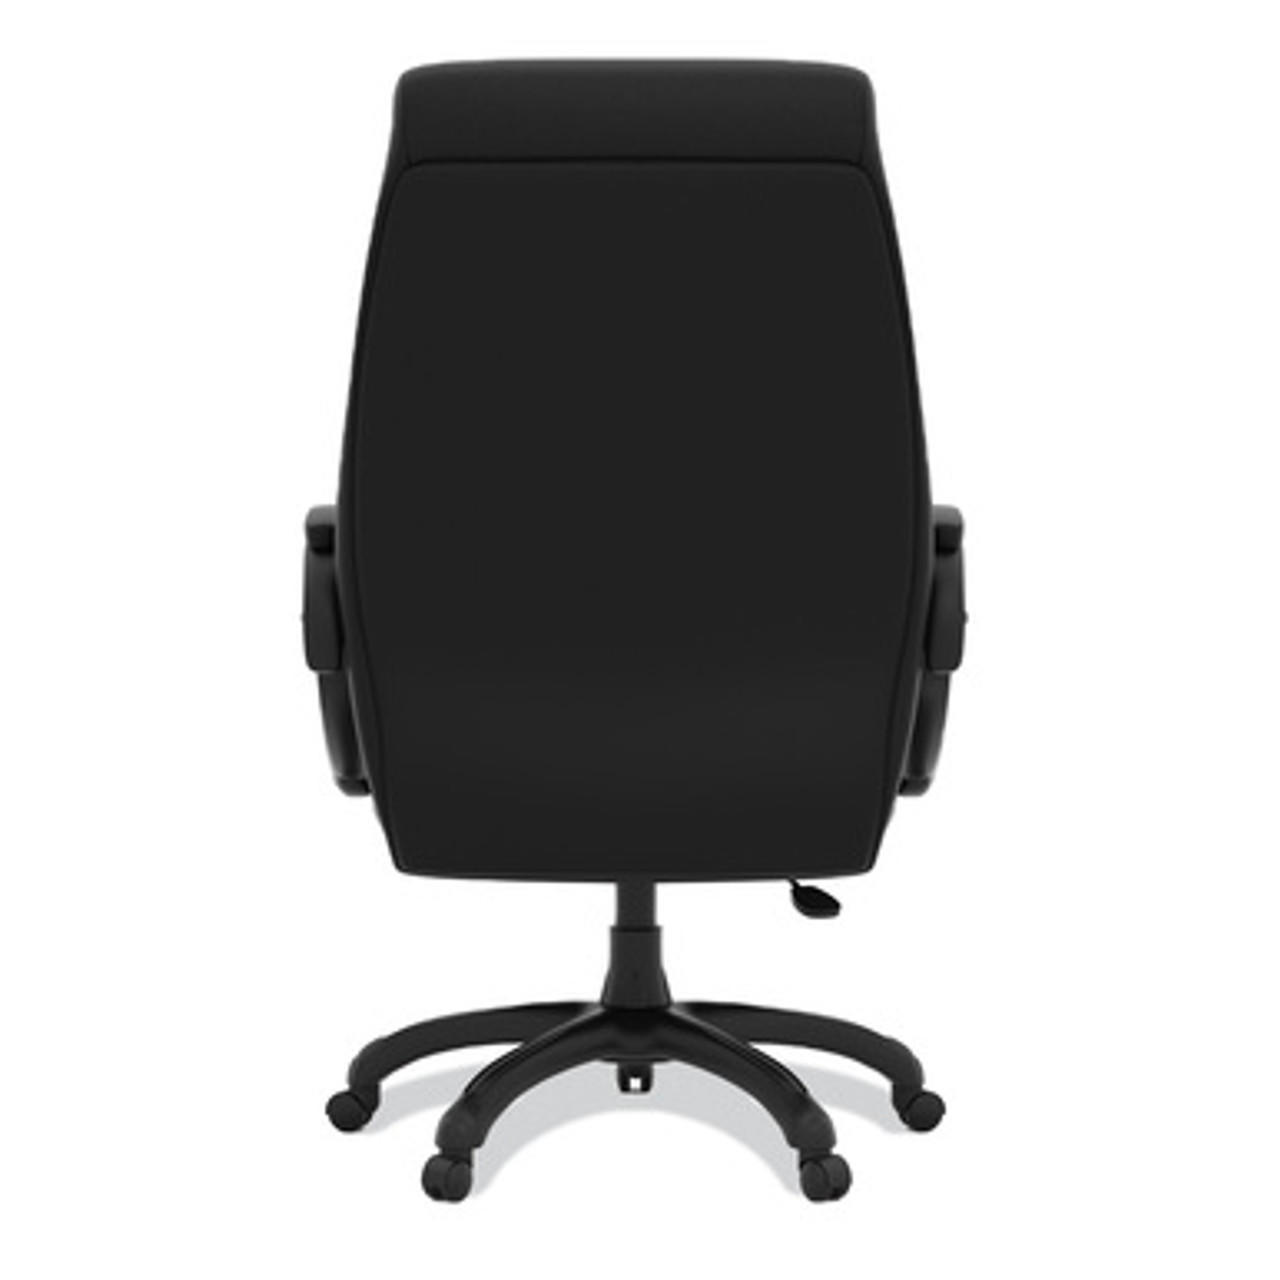  Office Source Sierra Collection Executive High Back Chair 10311A 